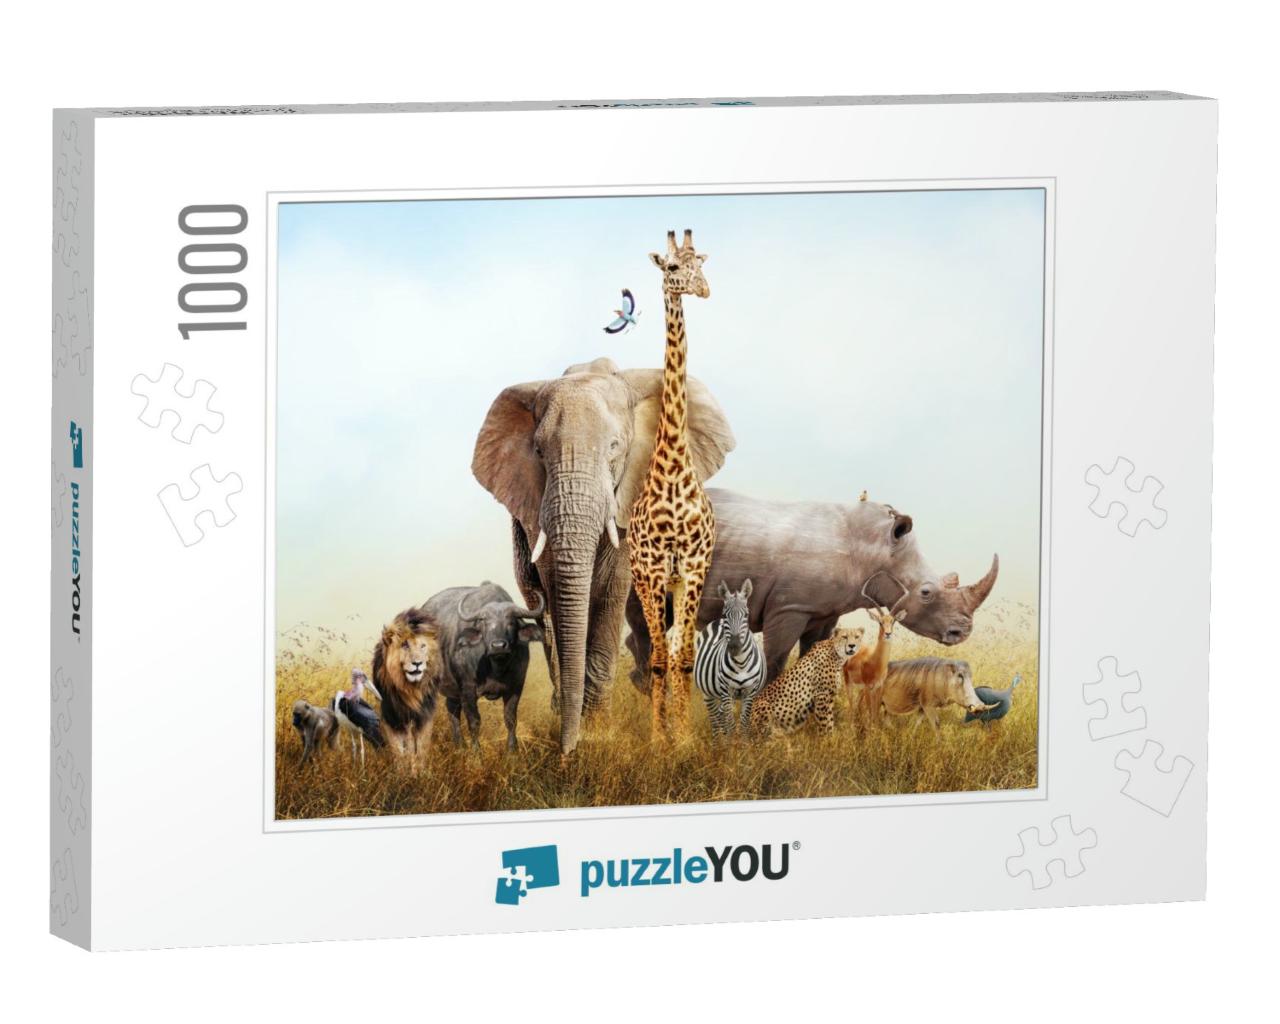 Large Group of African Safari Animals Composited Together... Jigsaw Puzzle with 1000 pieces